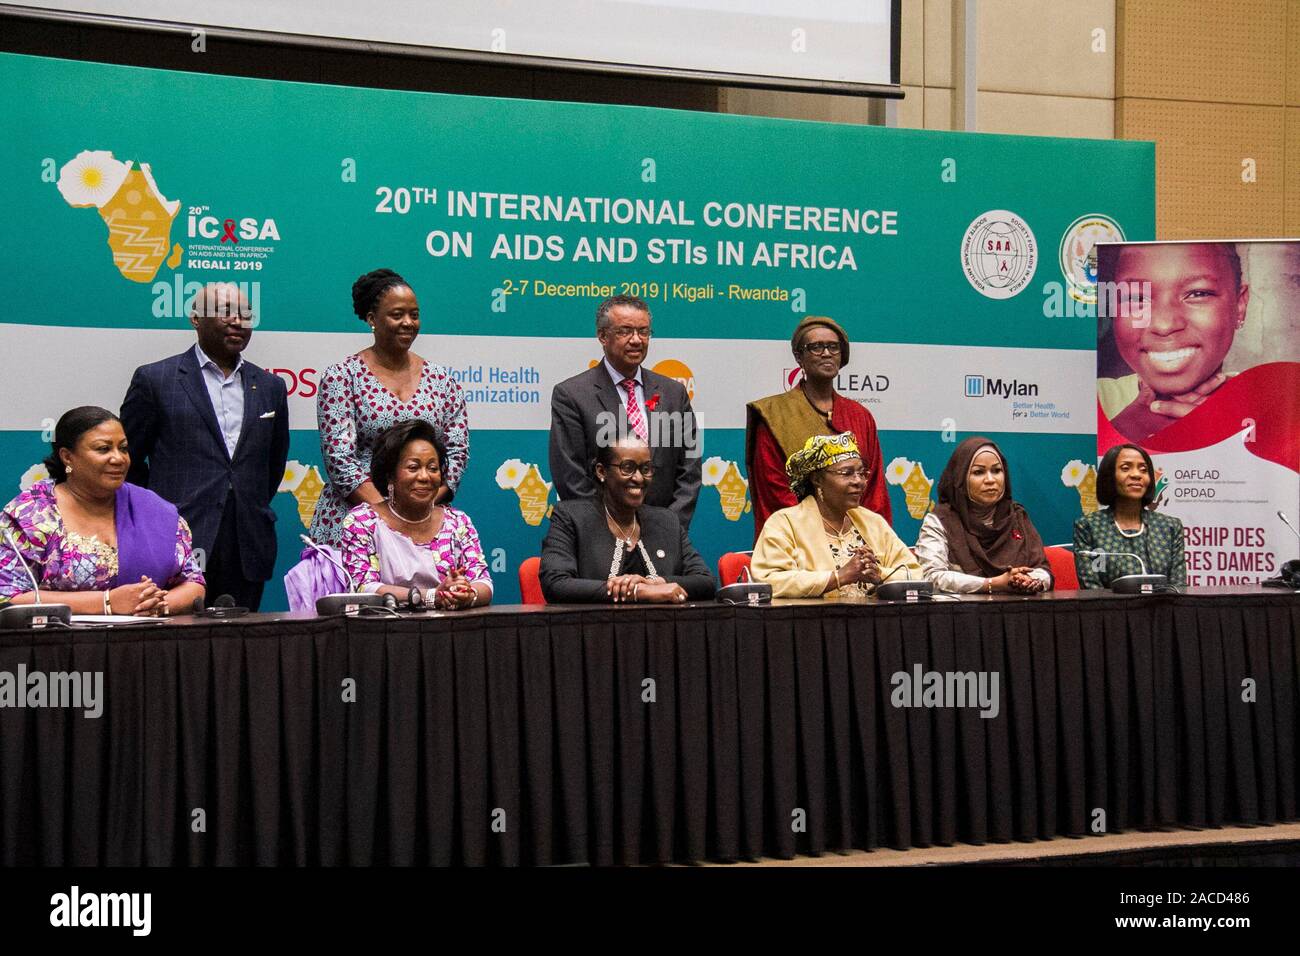 (191202) -- KIGALI, Dec. 2, 2019 (Xinhua) -- First ladies of African countries attend a sideline session of the International Conference on AIDS and Sexually Transmitted Infections in Africa in Kigali, capital of Rwanda, Dec. 2, 2019. 'Eliminating mother-to-child transmission of HIV, syphilis and hepatitis is achievable and you can help provide the key ingredient: political will,' Tedros Adhanom Ghebreyesus, Director General of World Health Organization (WHO), told first ladies of African countries at a sideline session of the International Conference on AIDS and Sexually Transmitted Infection Stock Photo